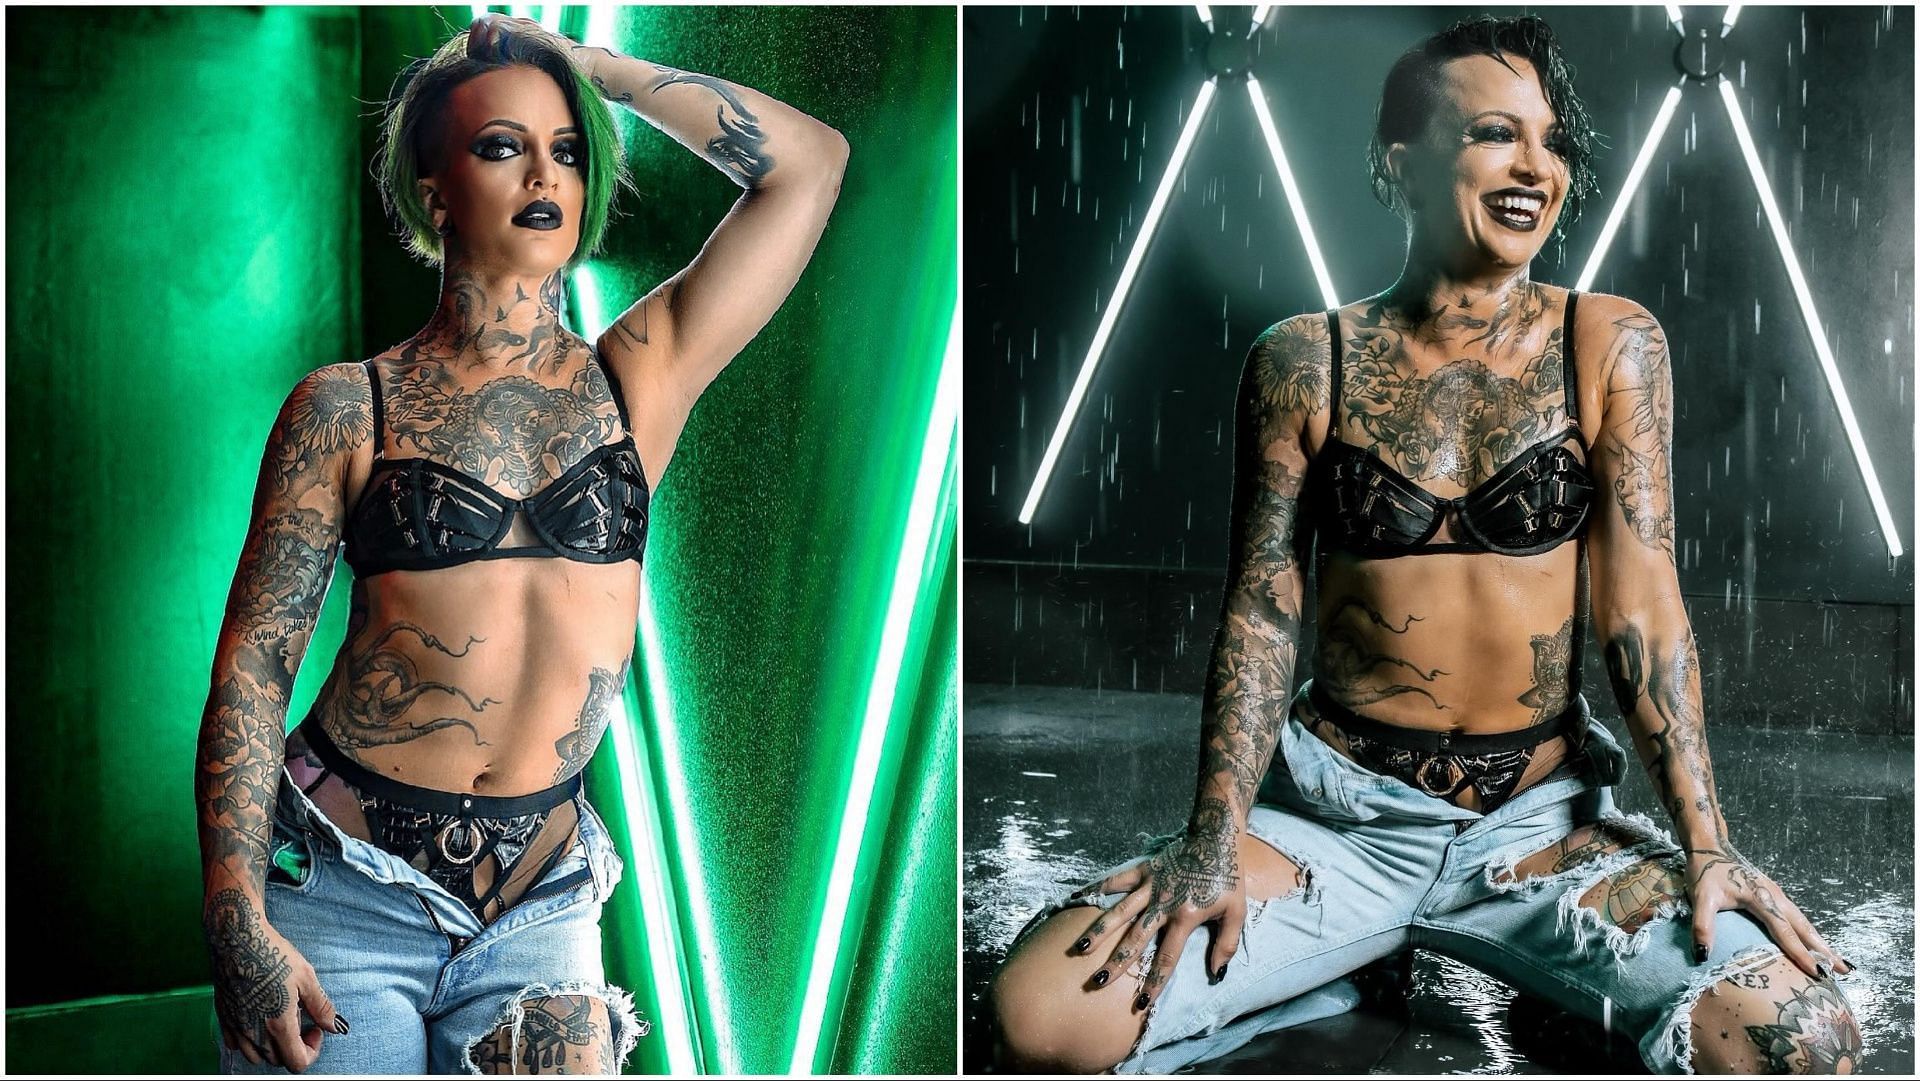 AEW star Ruby Soho poses at her official photoshoots